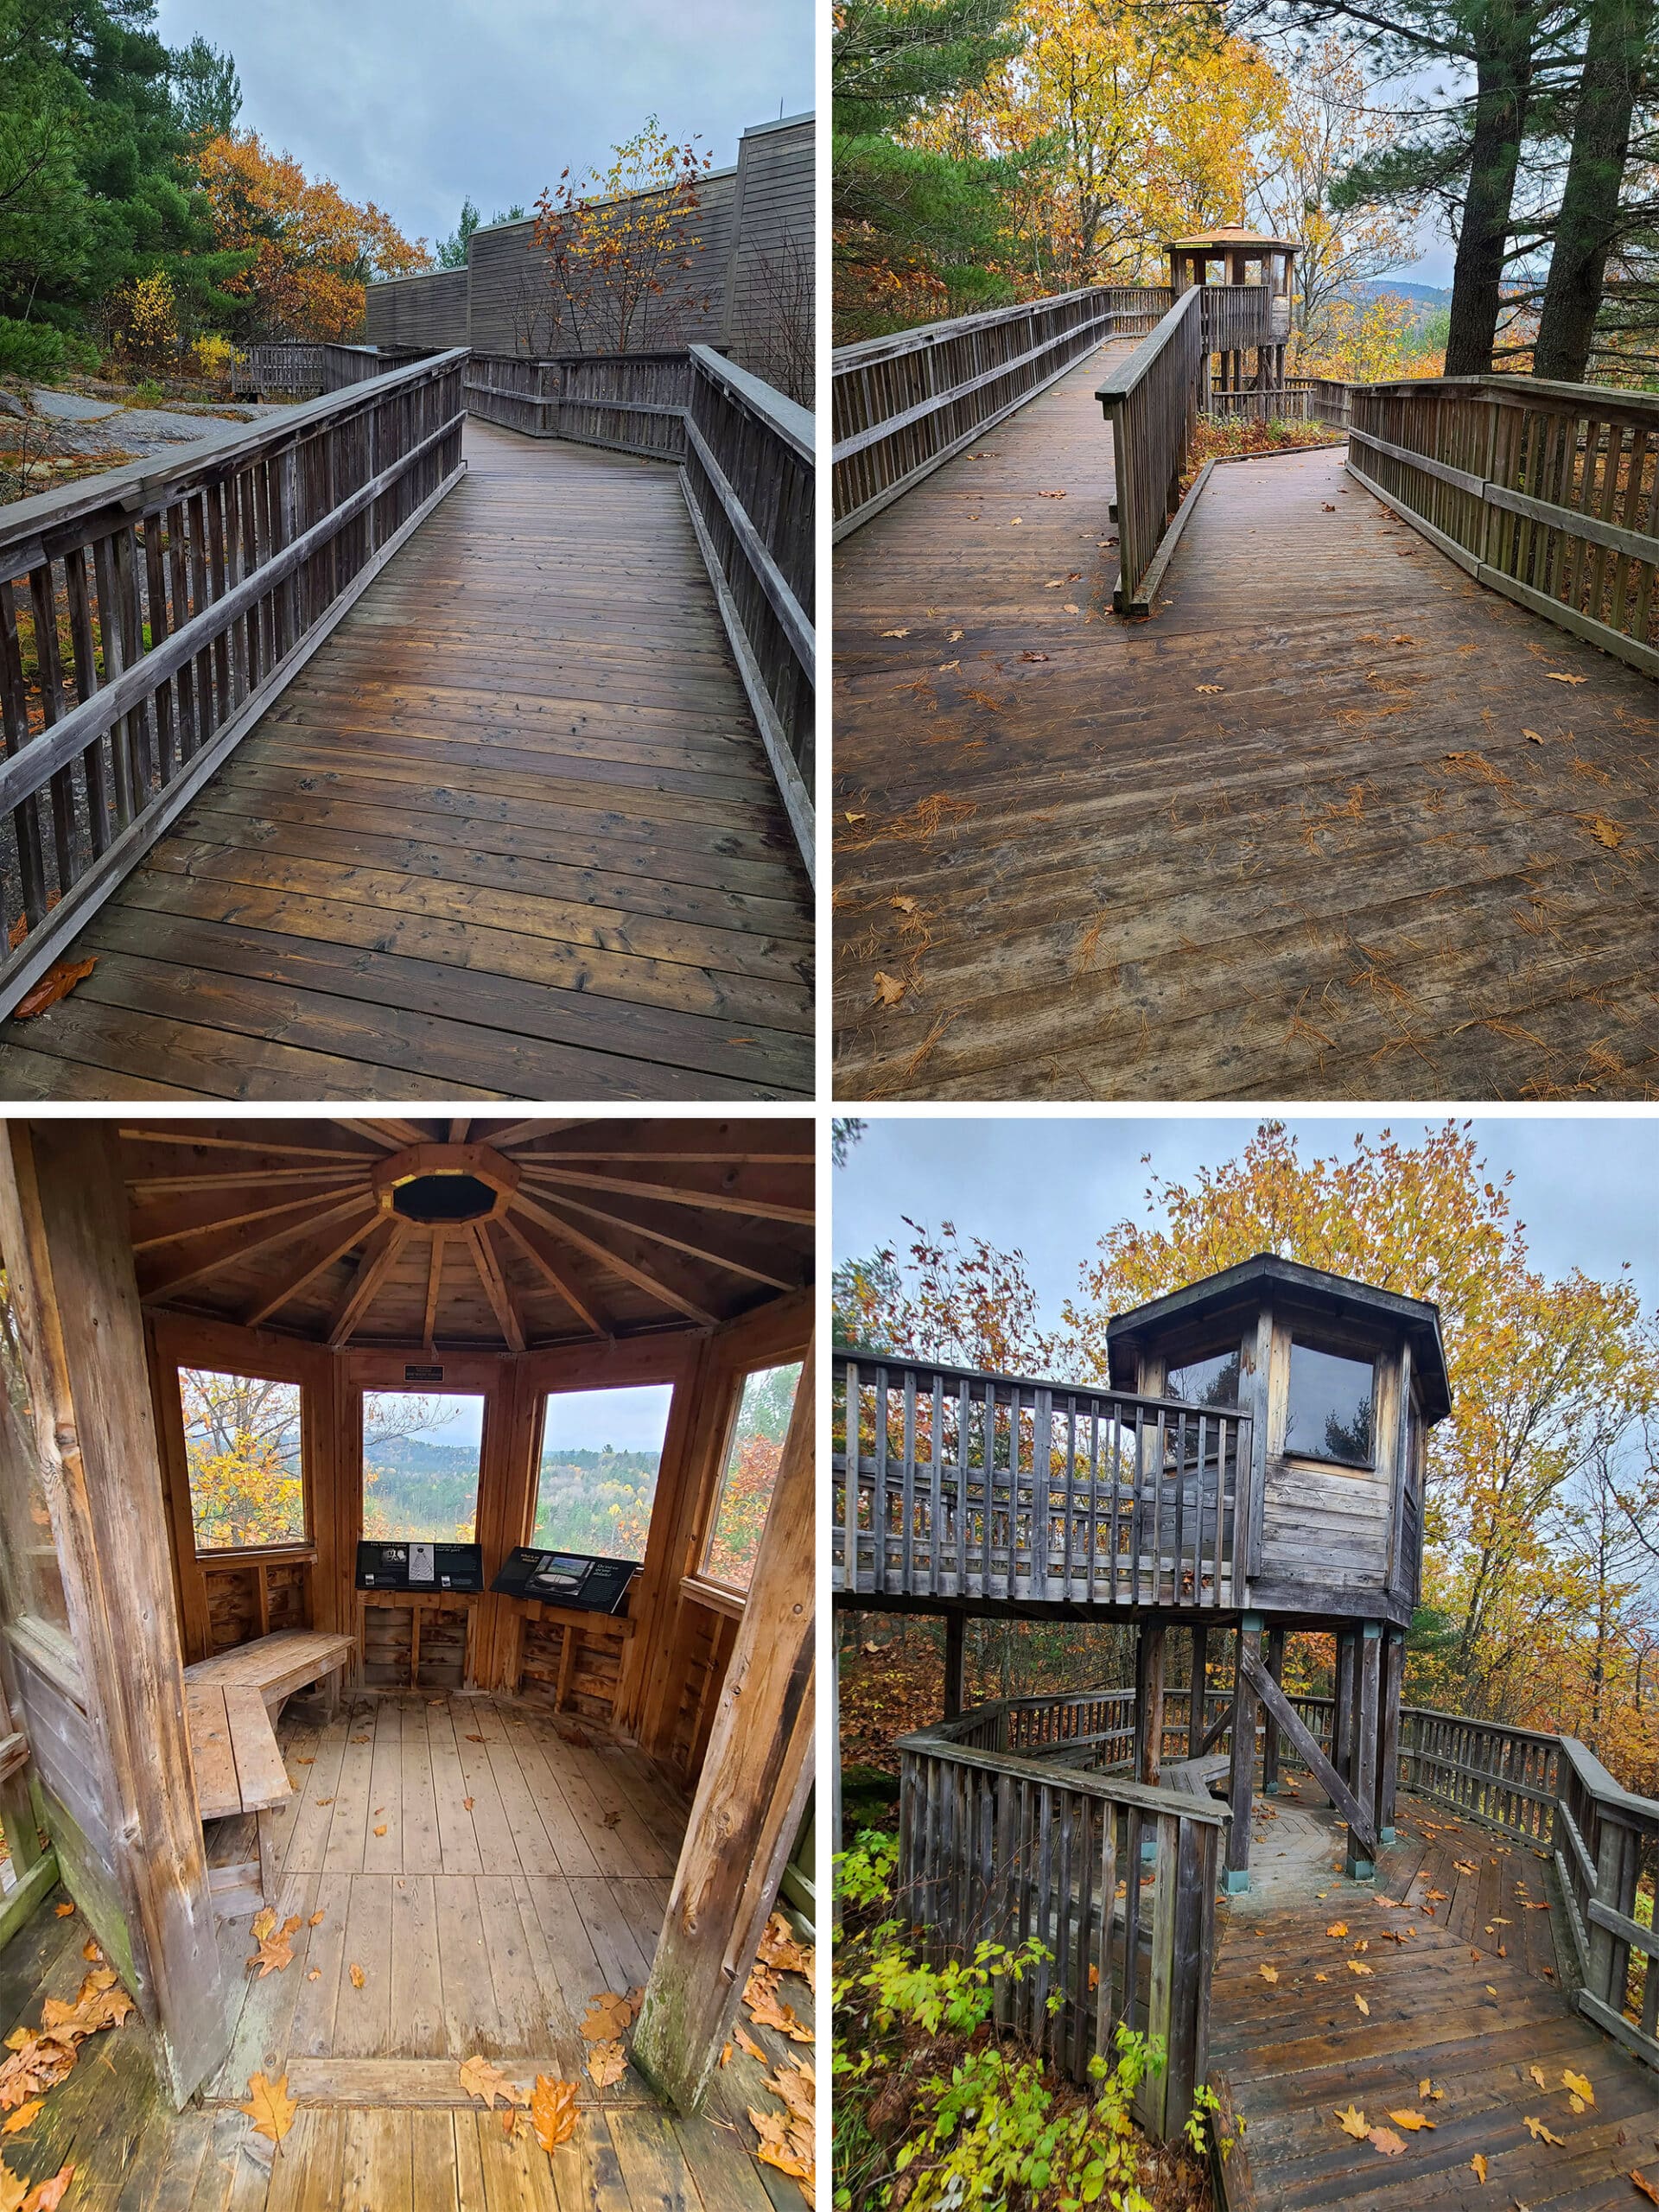 Compilation image of photos taken of the accessible walkway at the Algonquin Provincial Park Visitor Centre.